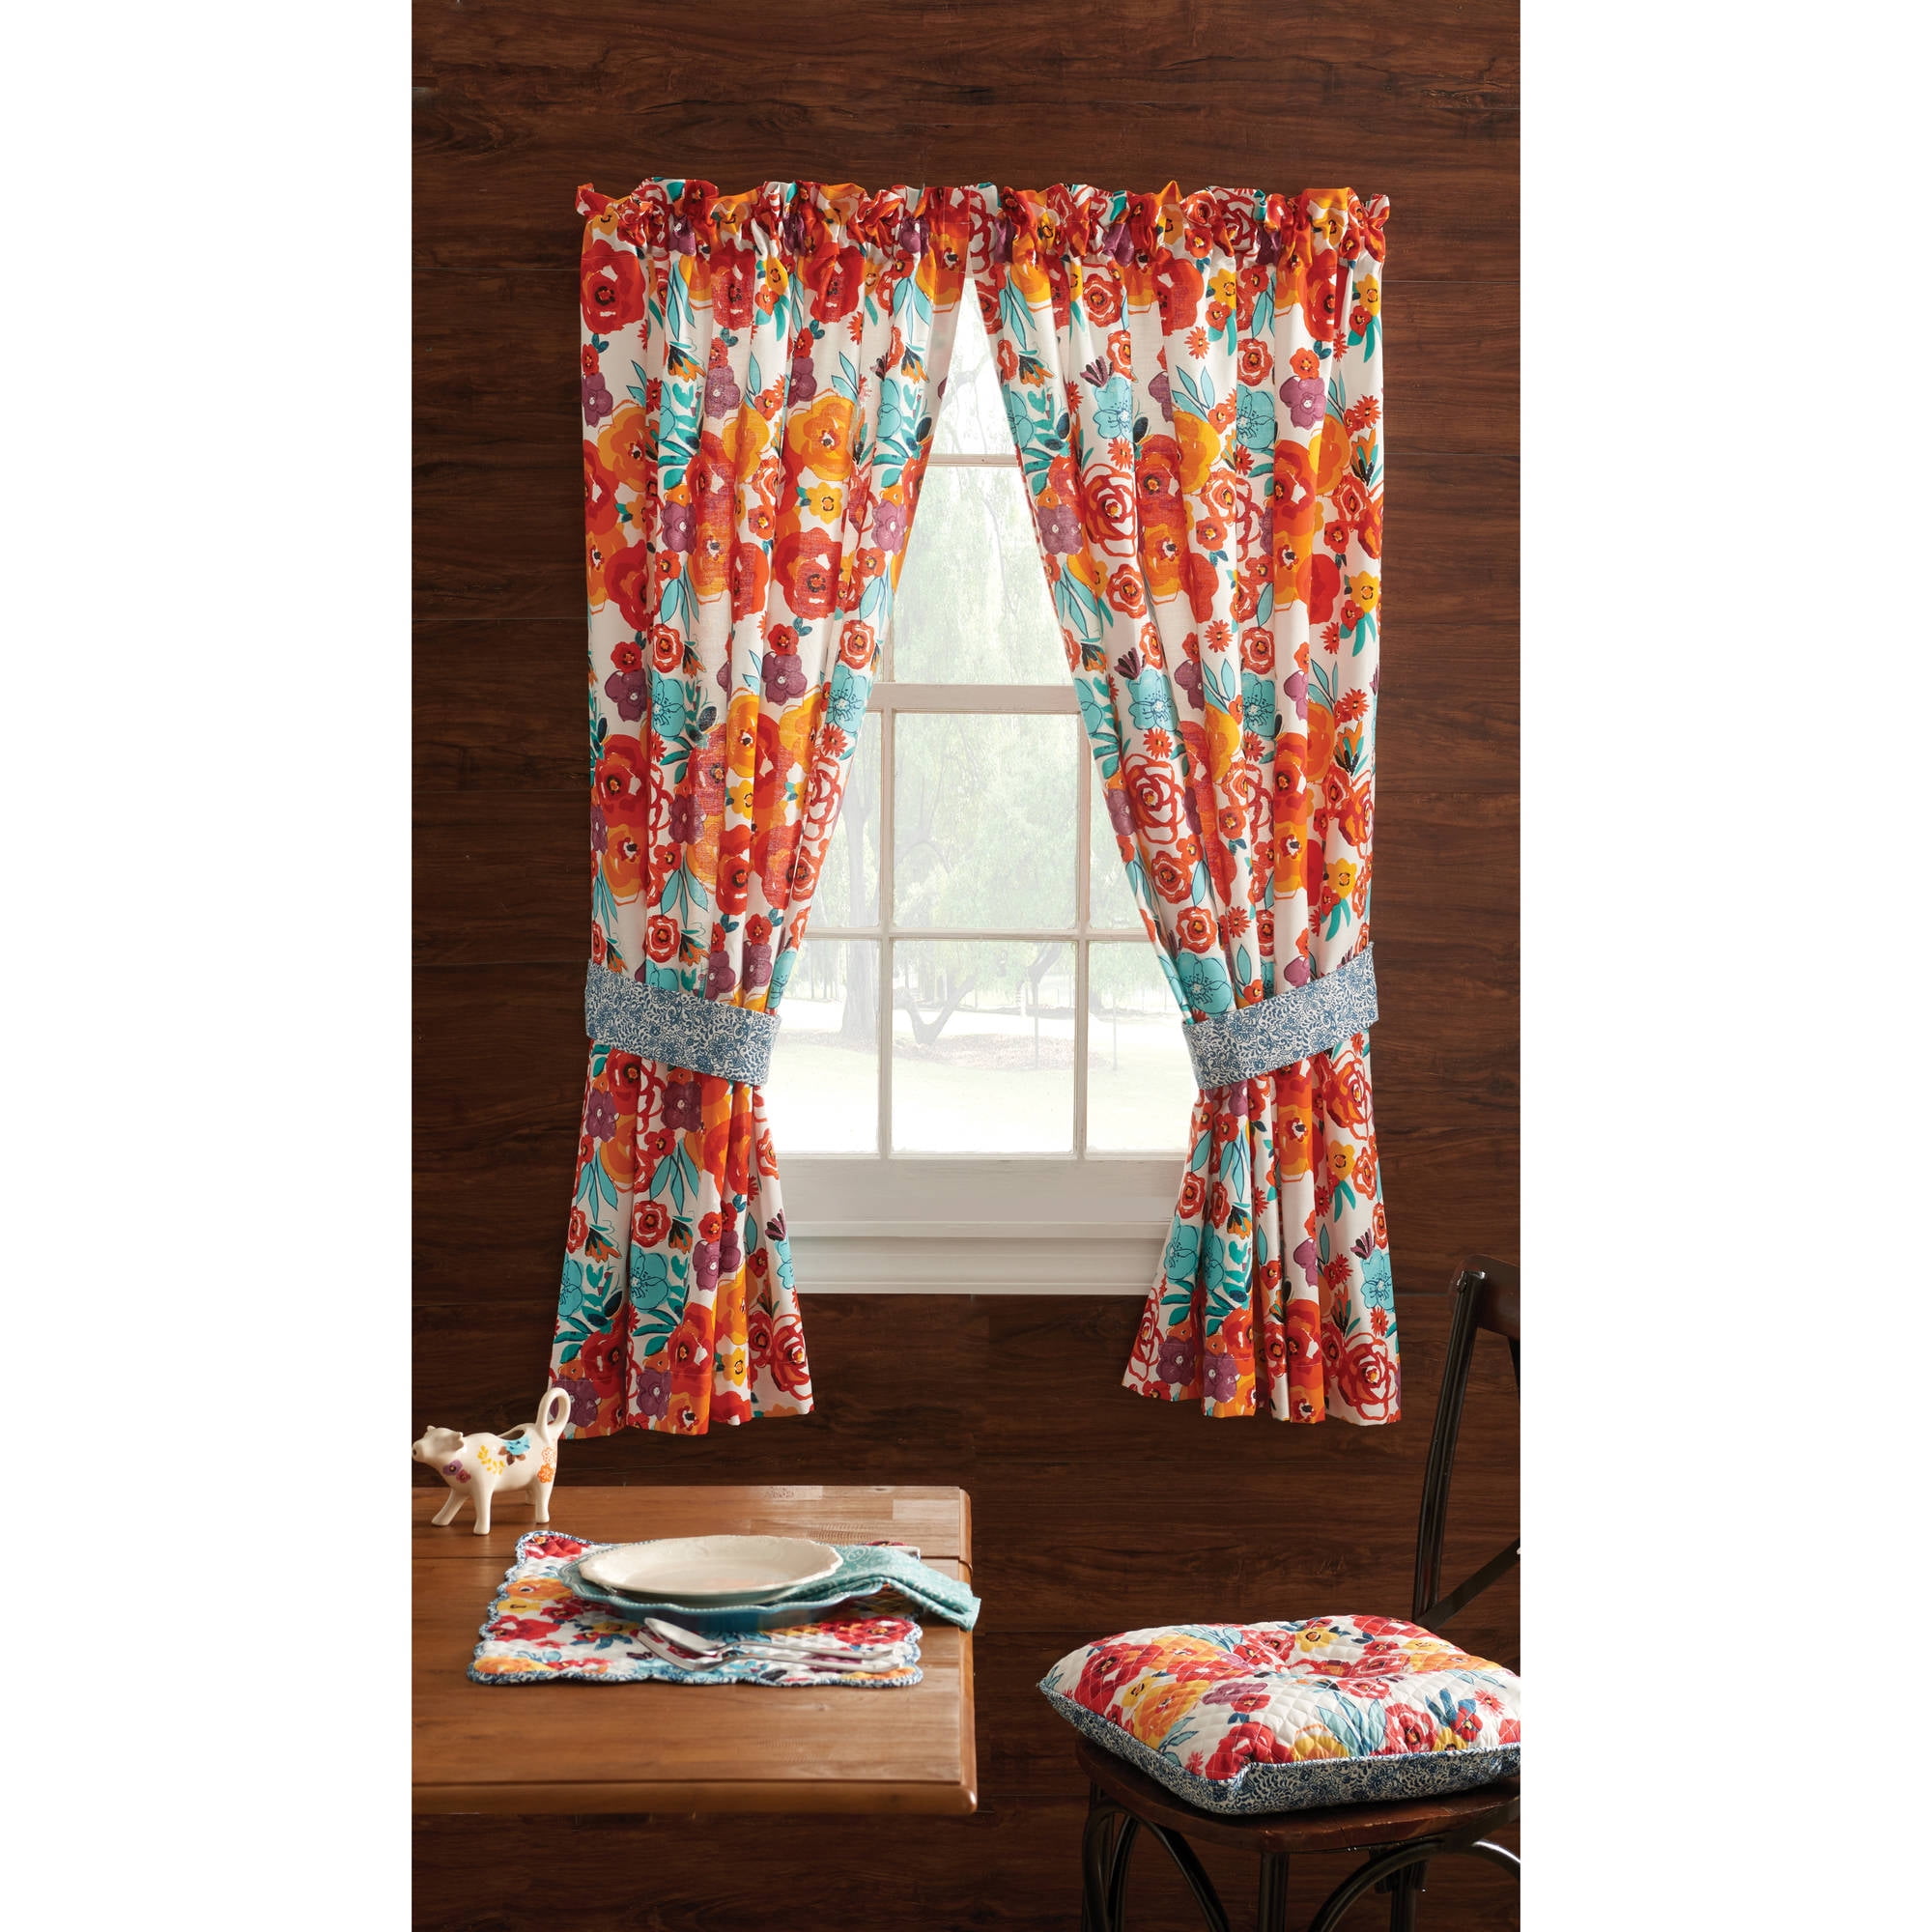 The Pioneer Woman Curtains